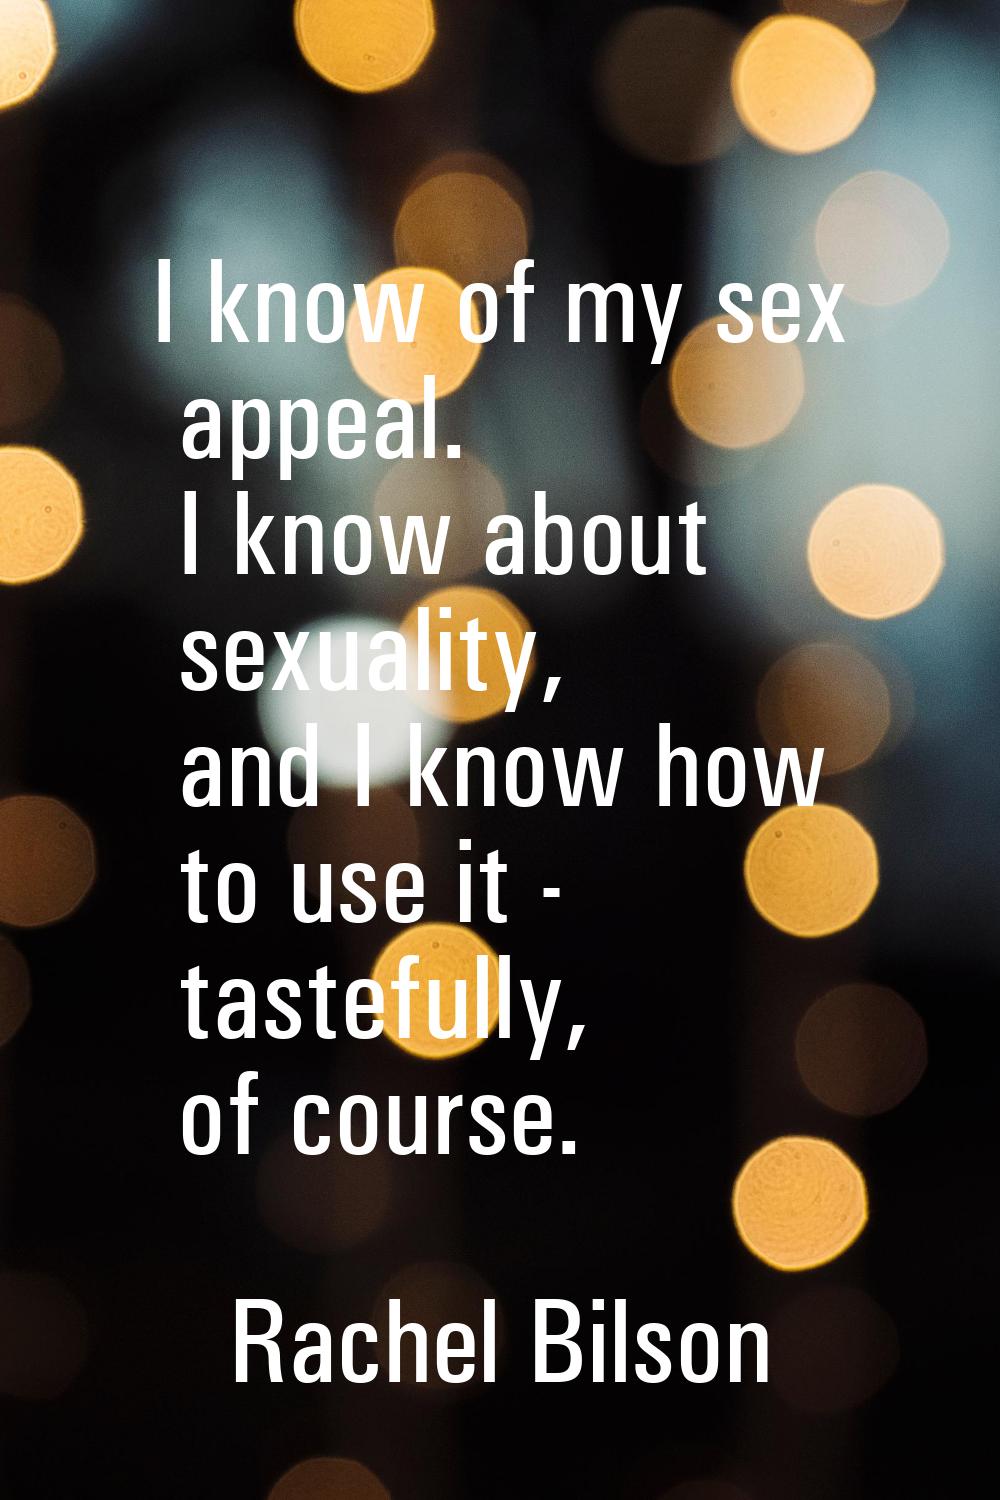 I know of my sex appeal. I know about sexuality, and I know how to use it - tastefully, of course.